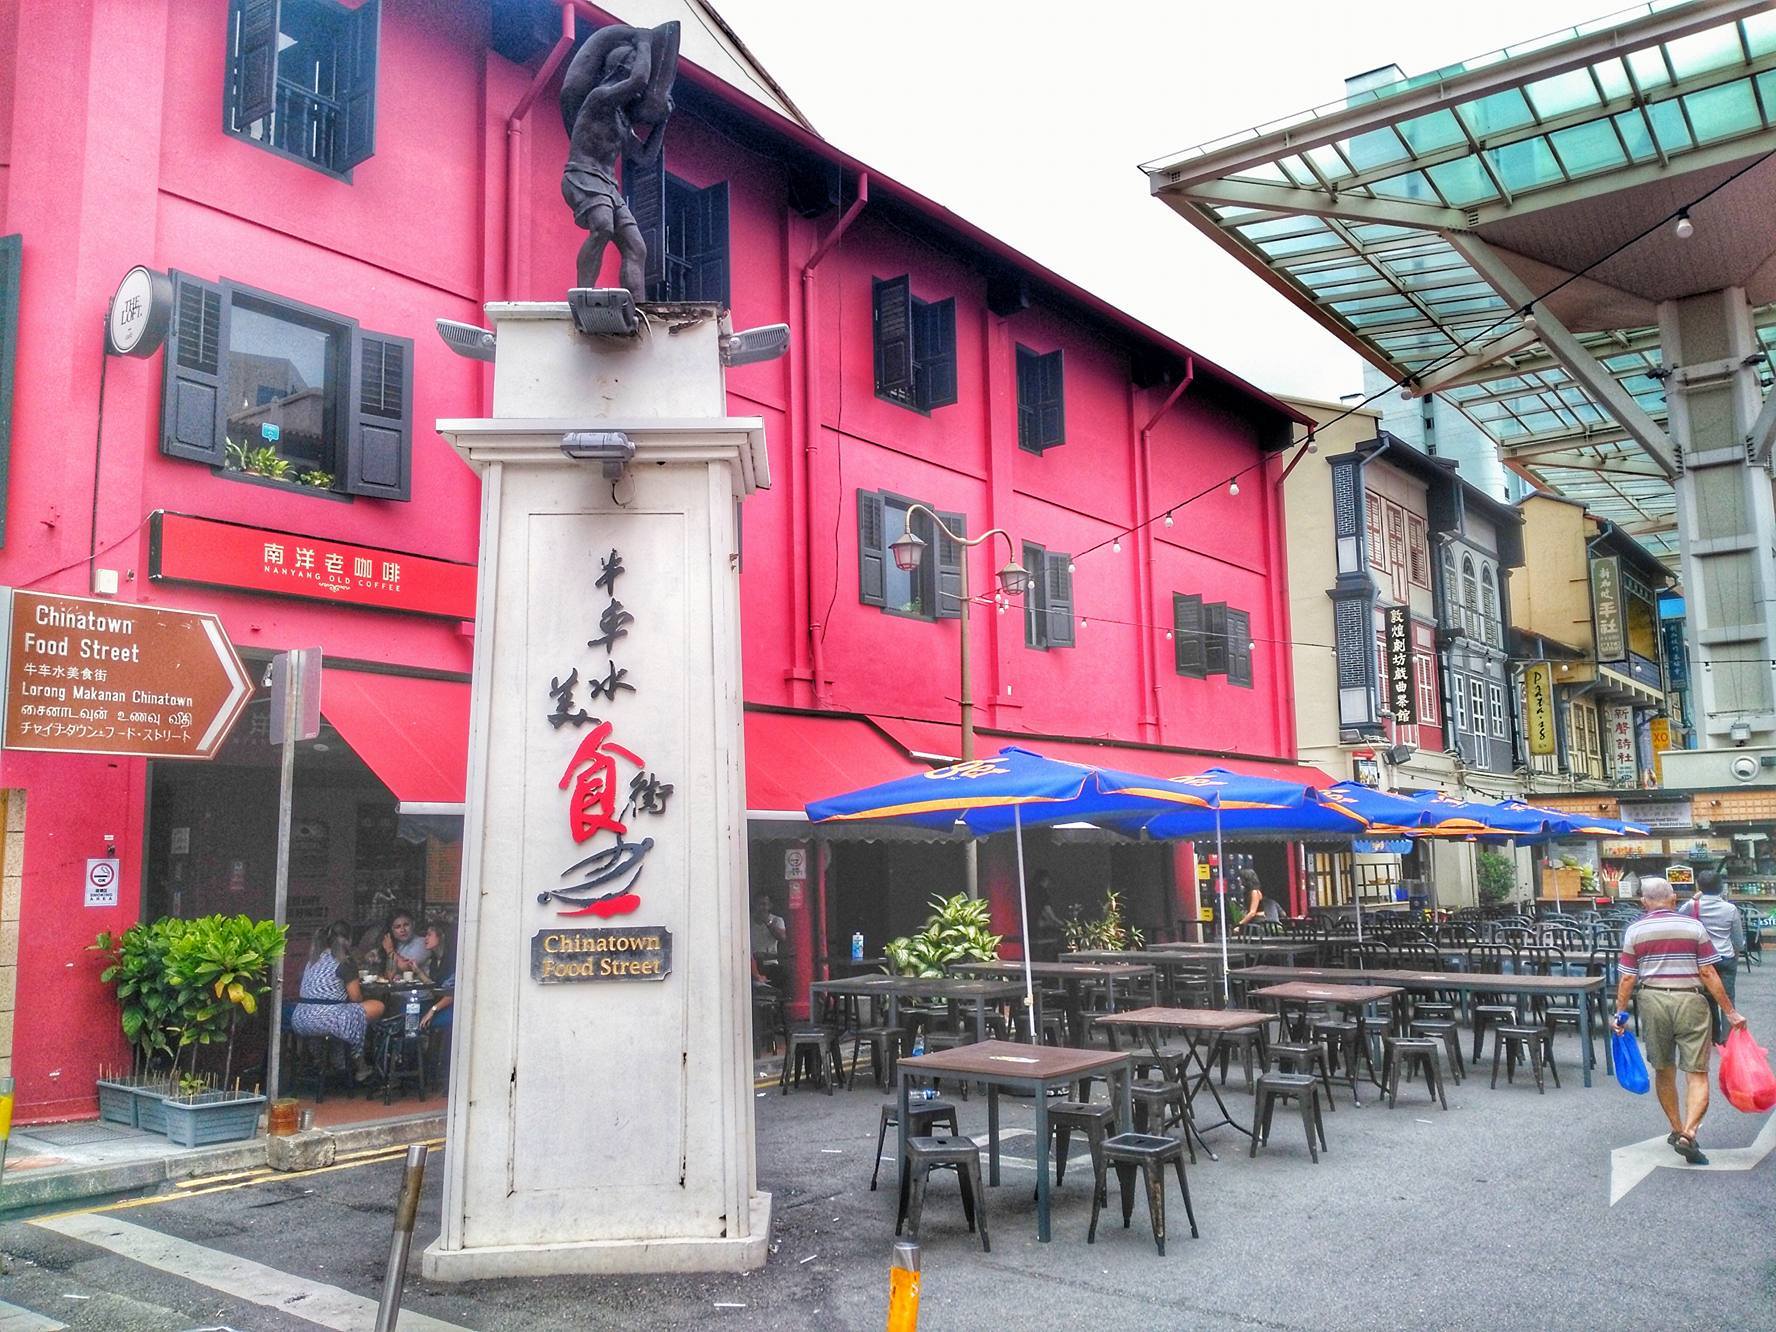 is singapore expensive - budget accommodations near chinatown